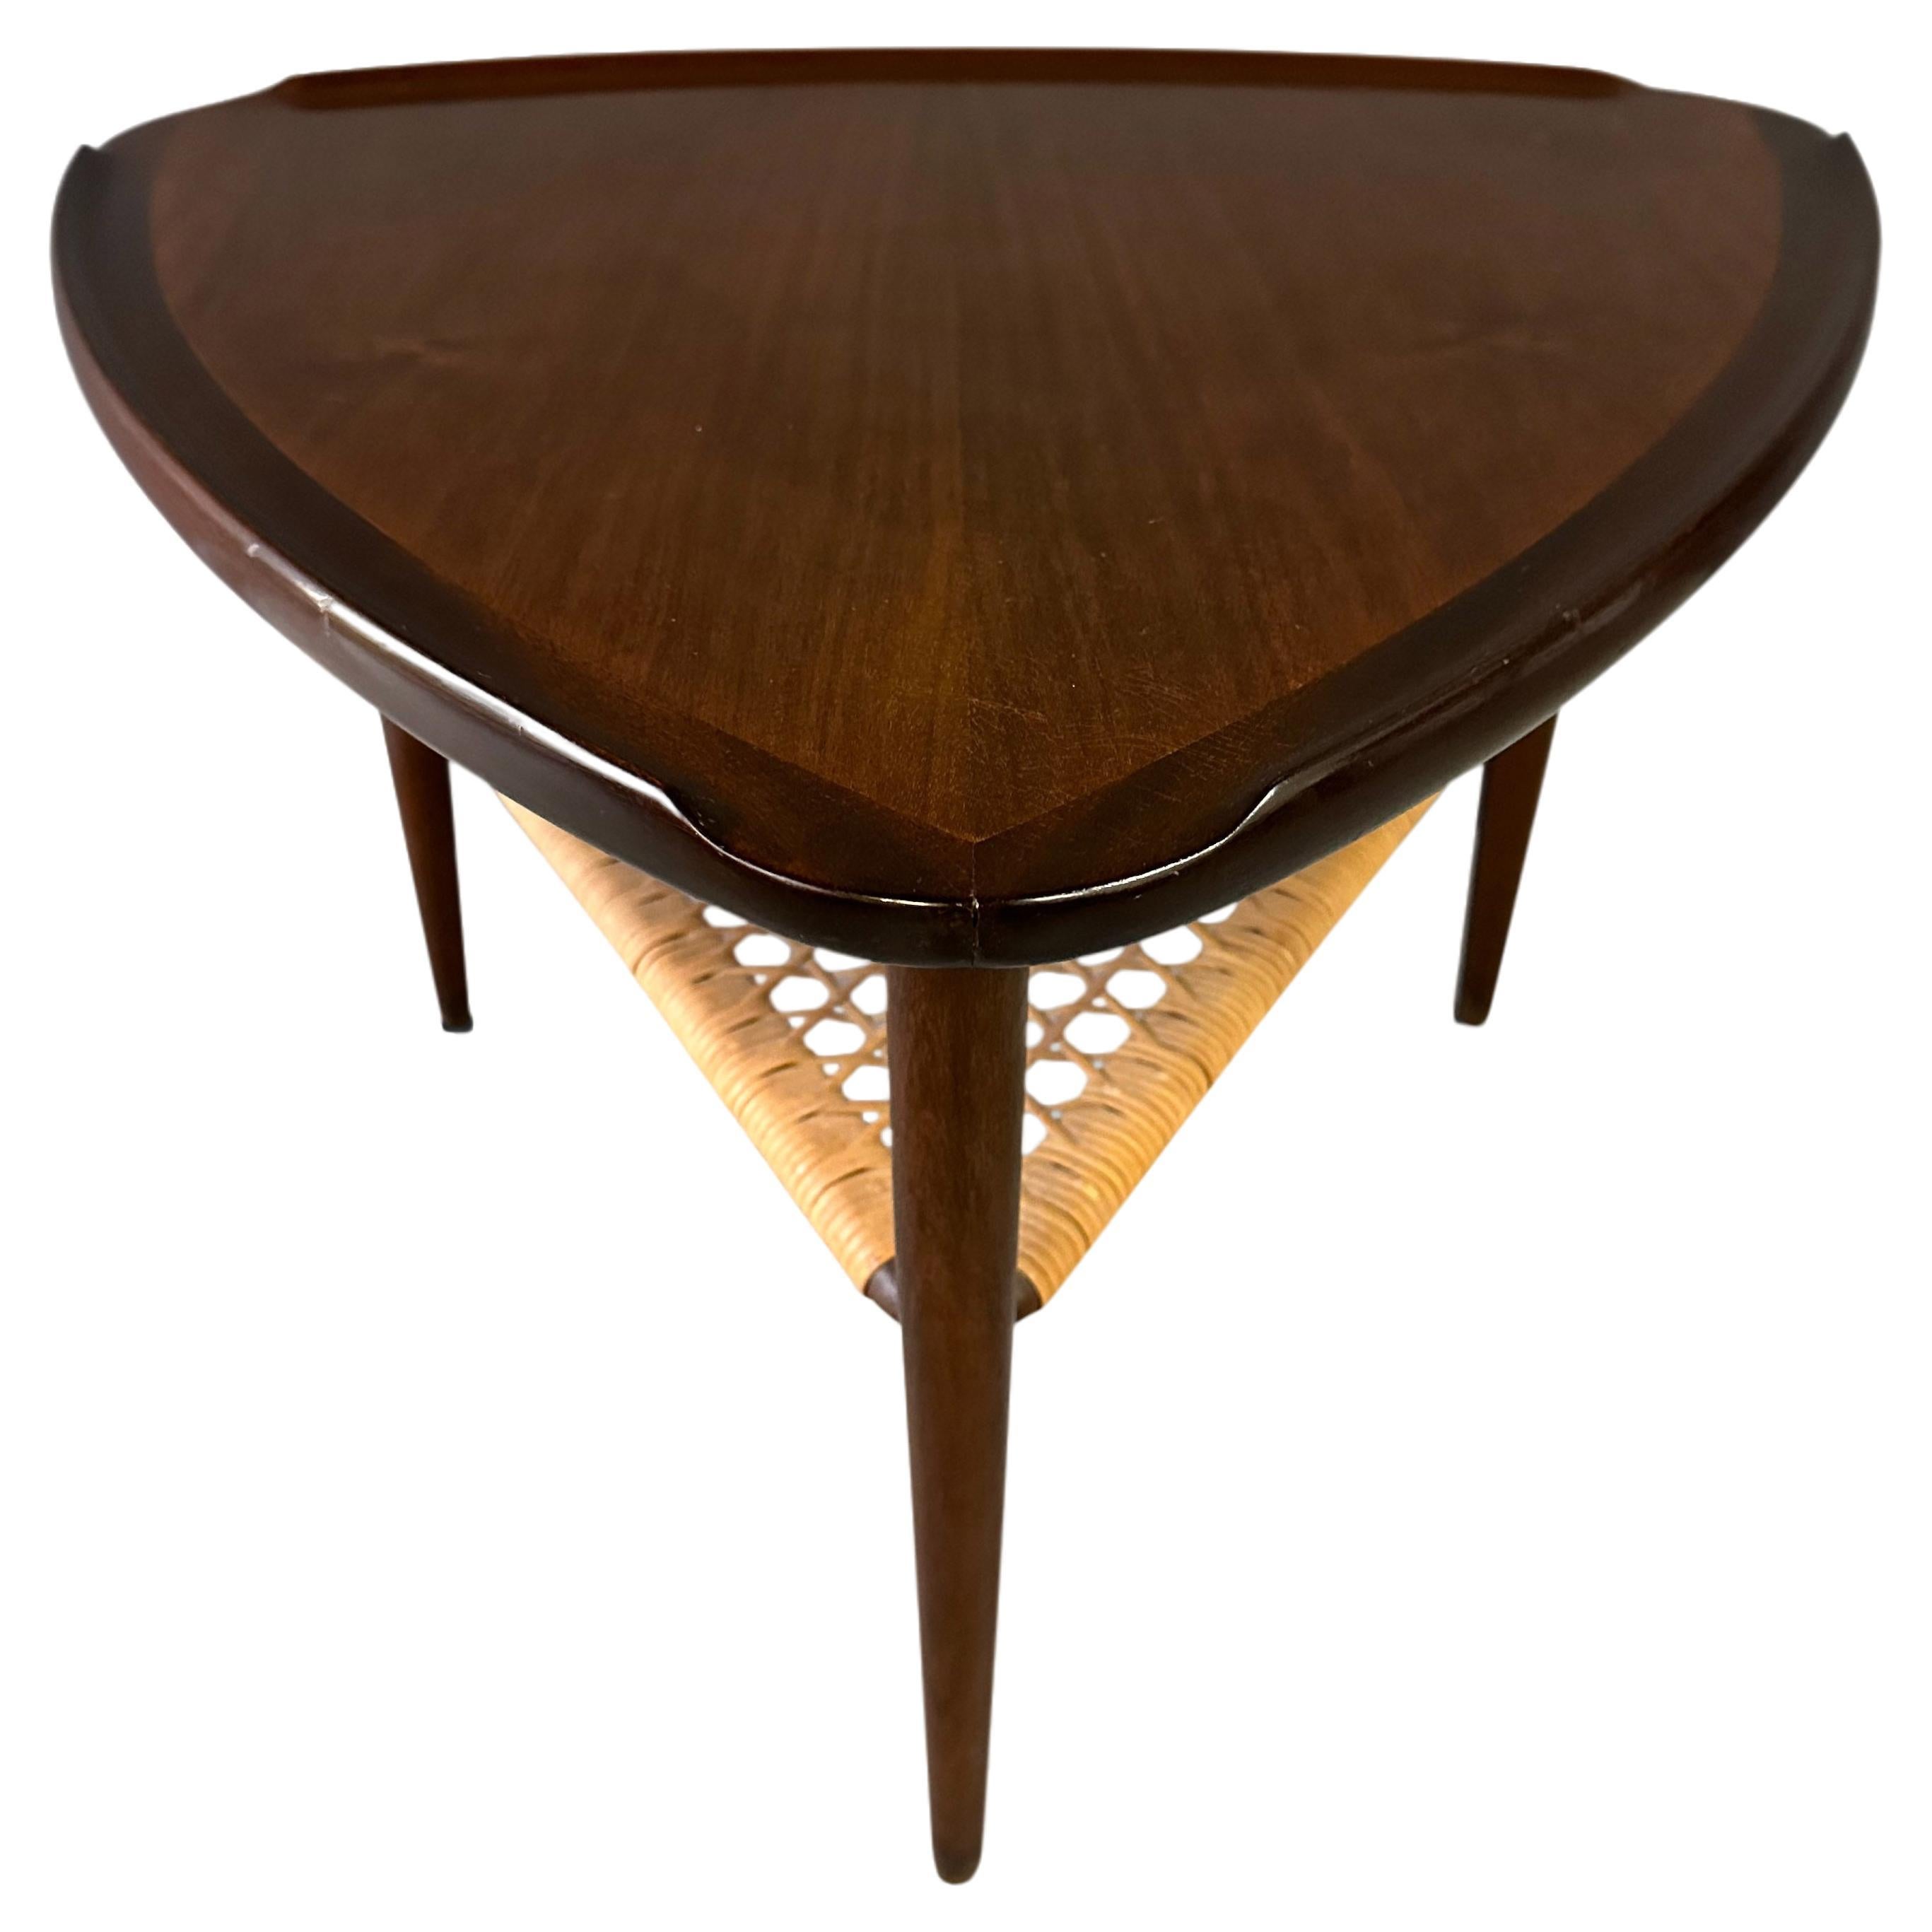 Danish Modern Walnut and Cane Selig Occasional Triangle End Table by Poul Jensen For Sale